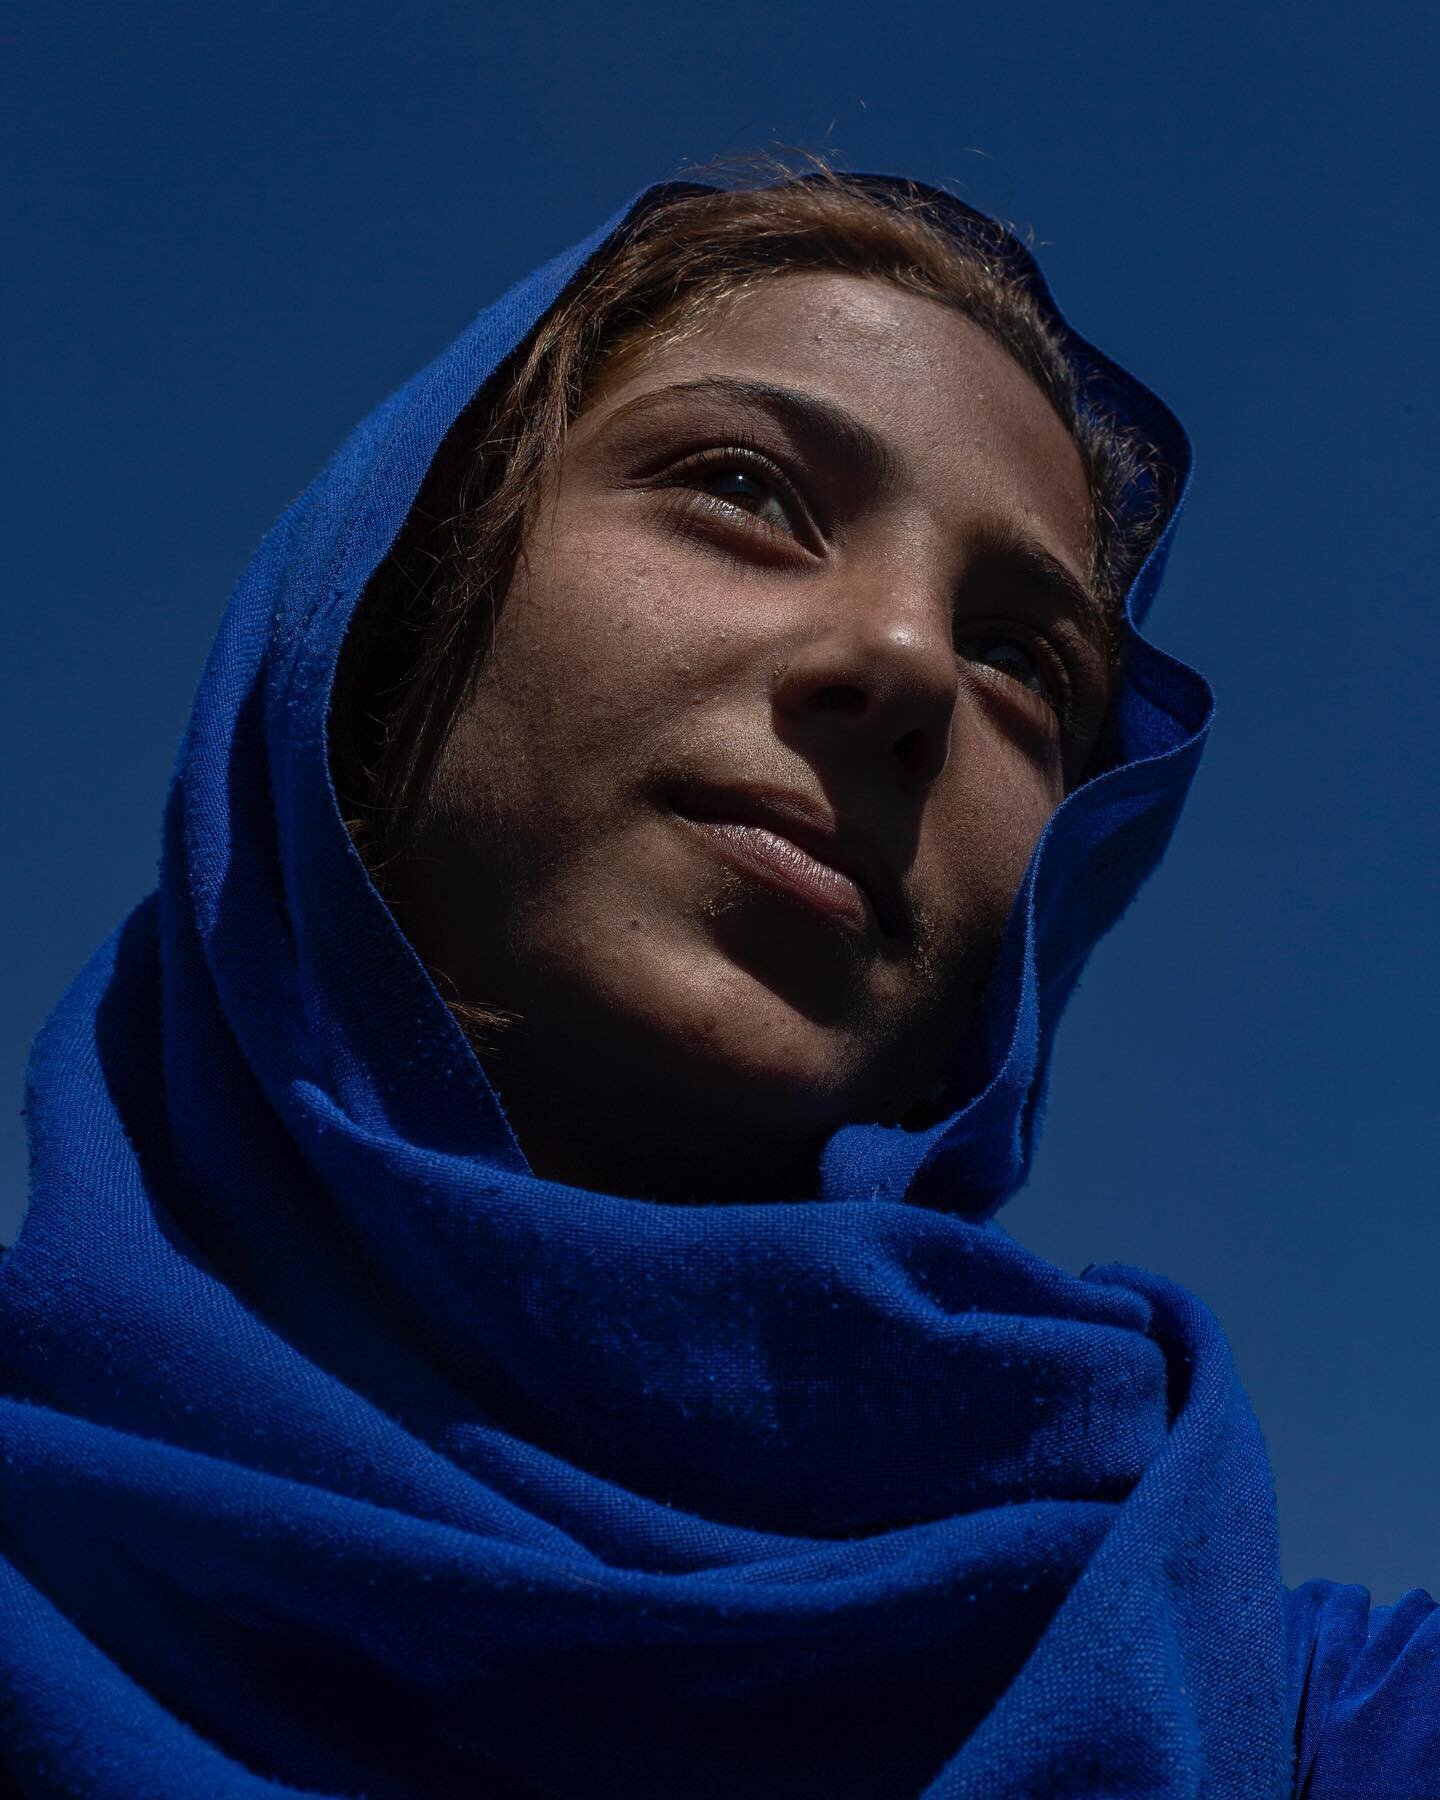 Lebanon, Bekaa Valley, October 2020.
- a Syrian young woman in one of the informal camps where refugees live since the beginning of the war in Syria in 2011, ten years ago.
.
from the project on Syrian refugees done in collaboration with @weworld.onl